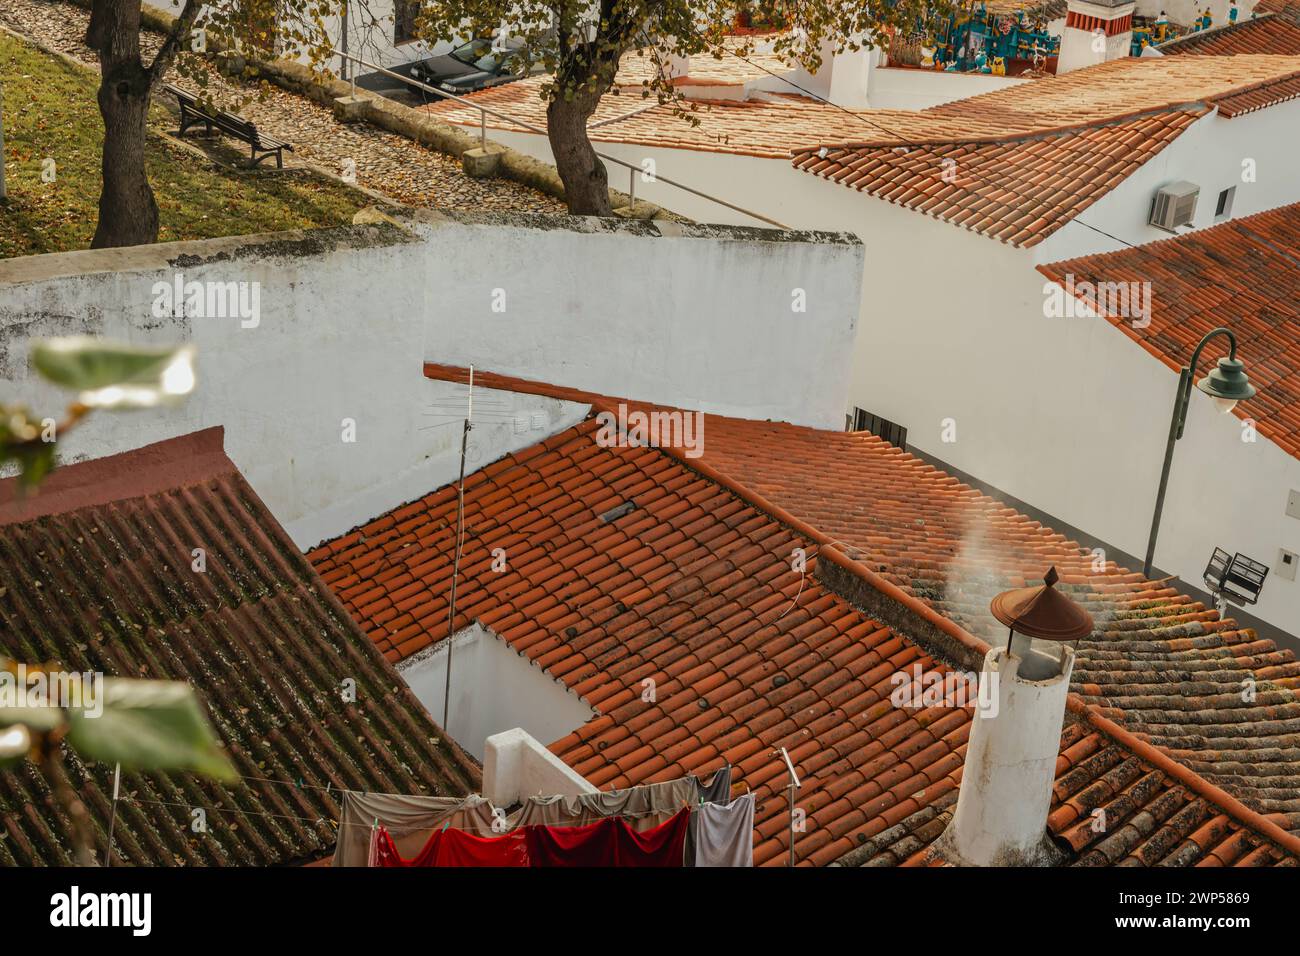 Portugal Cultural travel, city trips and interesting sights View of the rooftops of the city of Serpa in the Alentejo region Stock Photo